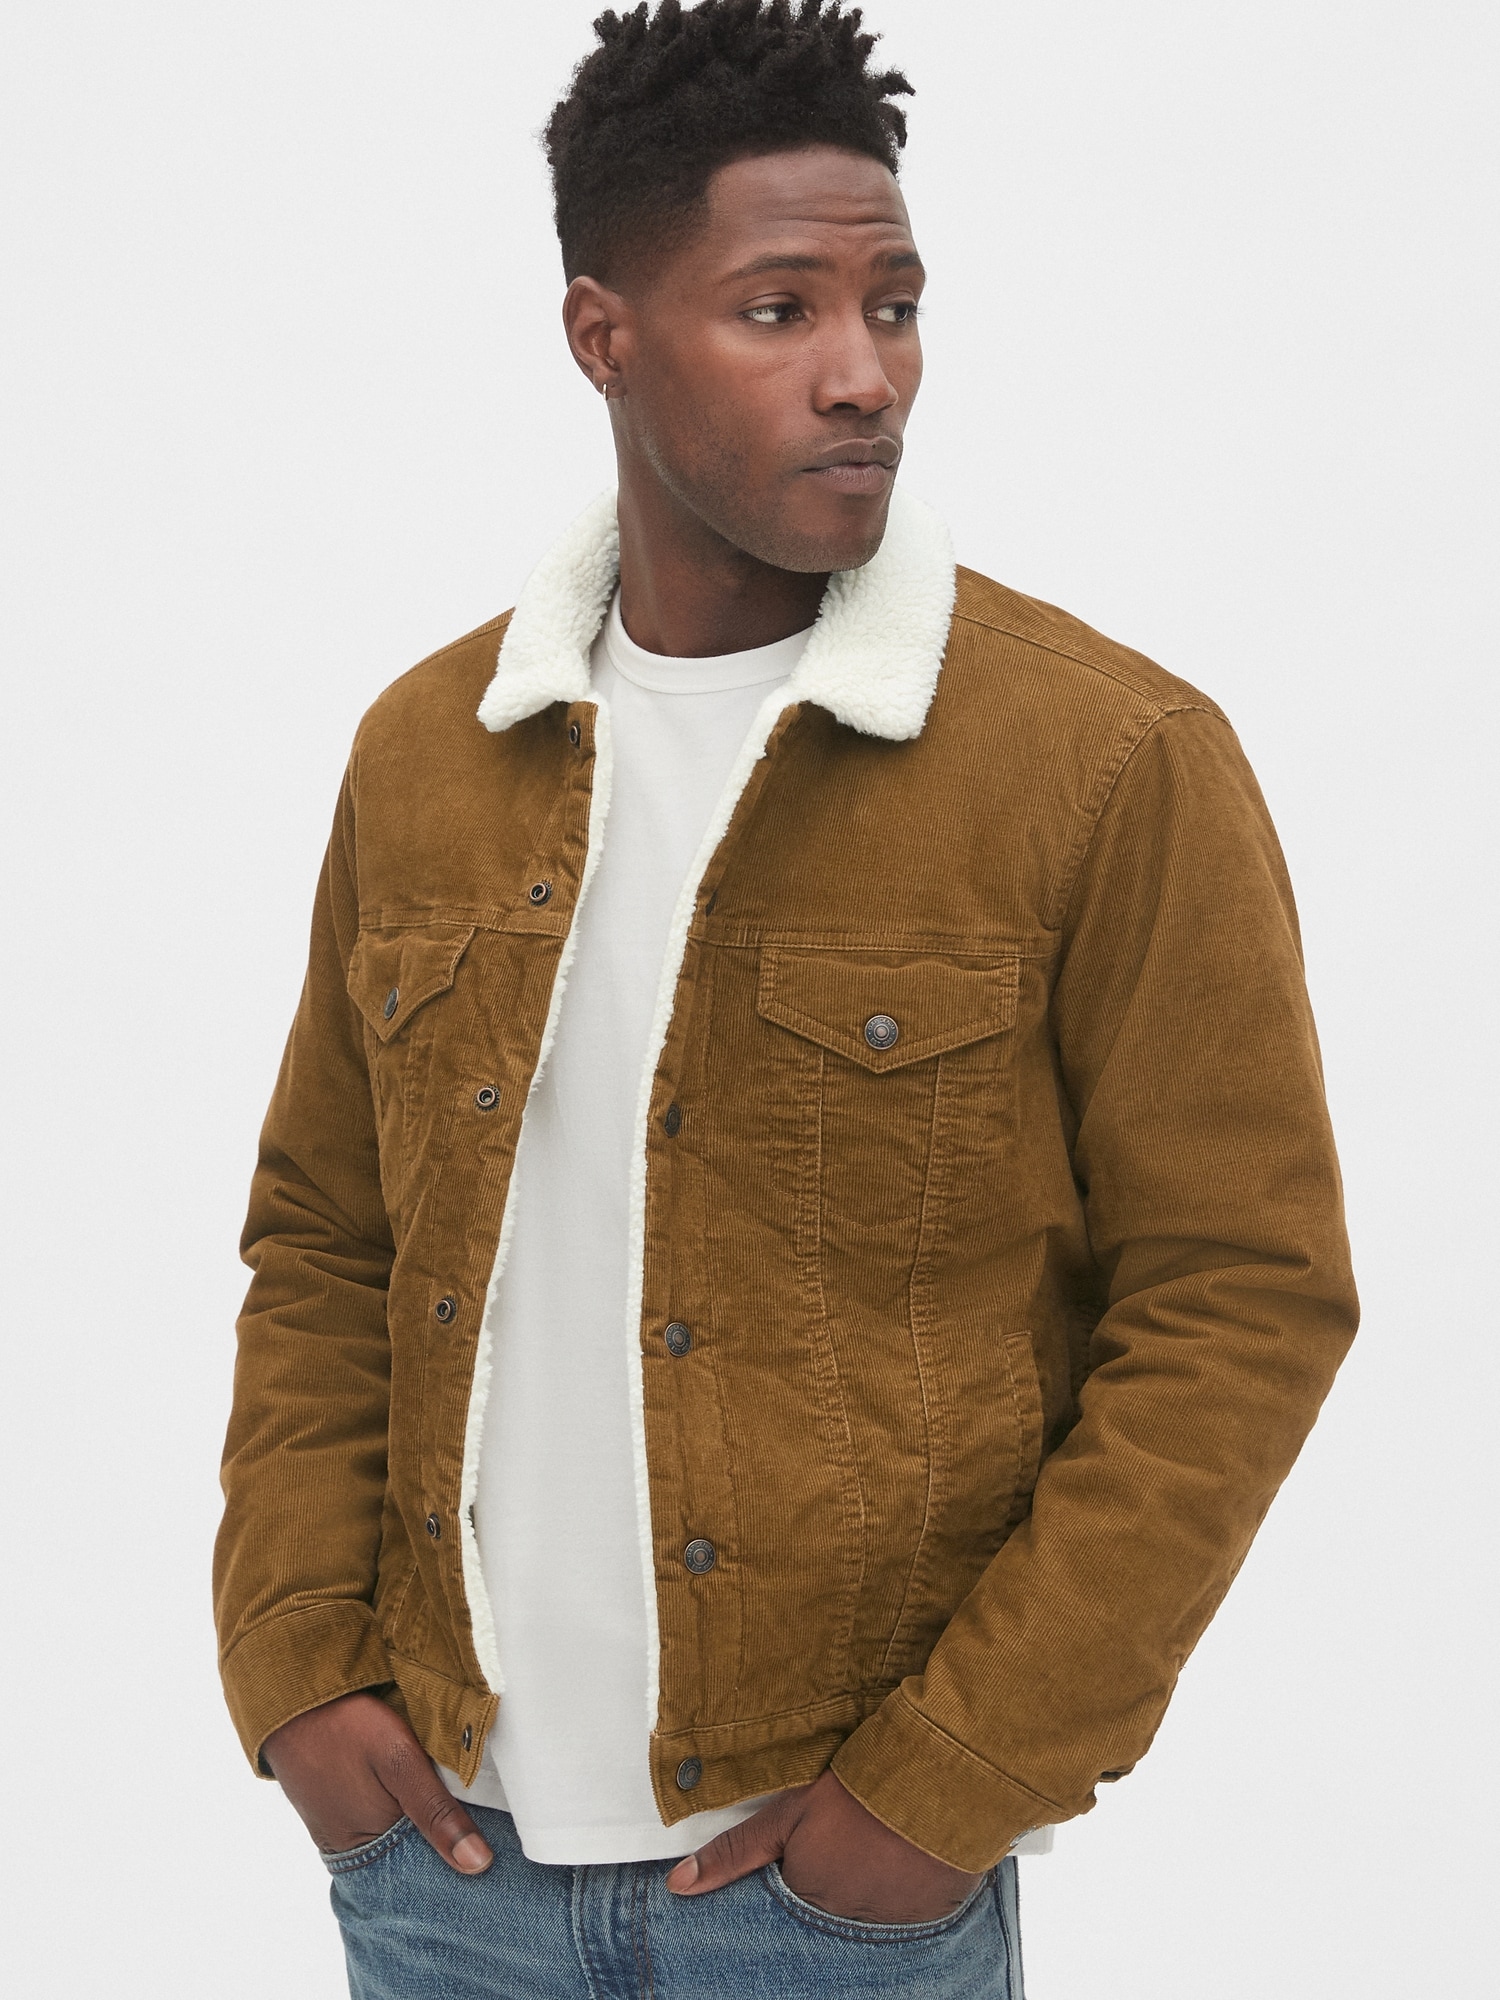 corduroy jacket with sherpa lining